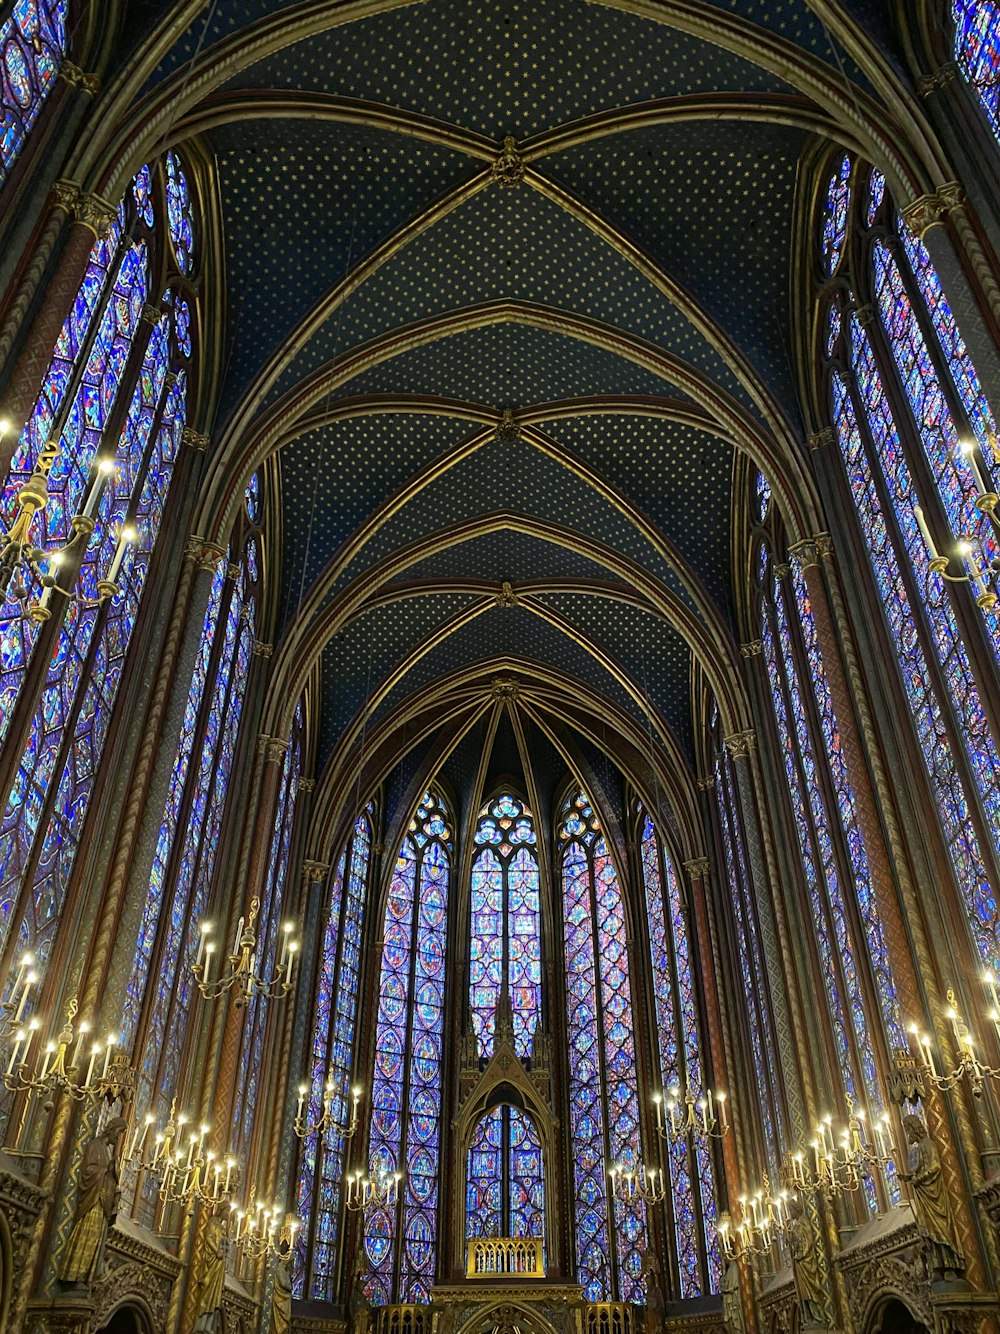 a large cathedral with stained glass windows and chandeliers